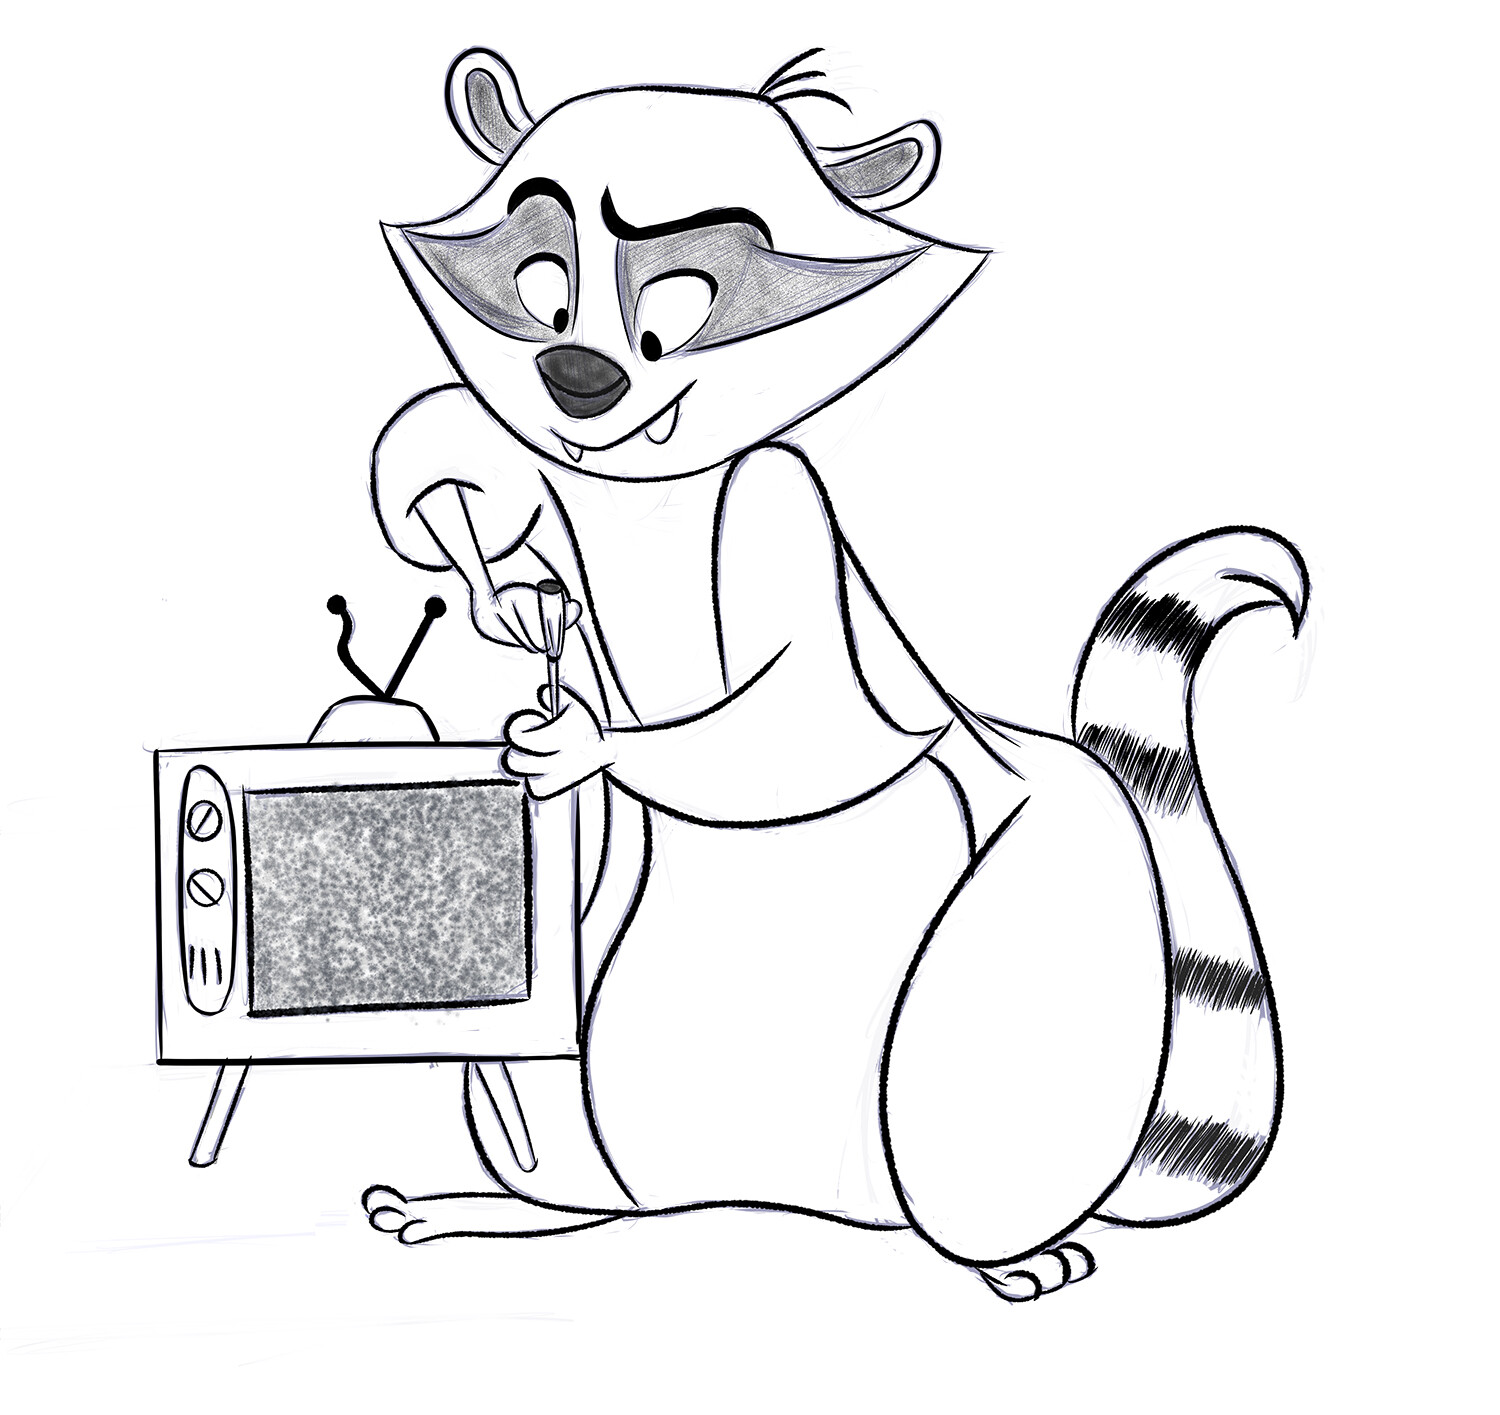 ArtStation - raccoon is trying to fix the TV